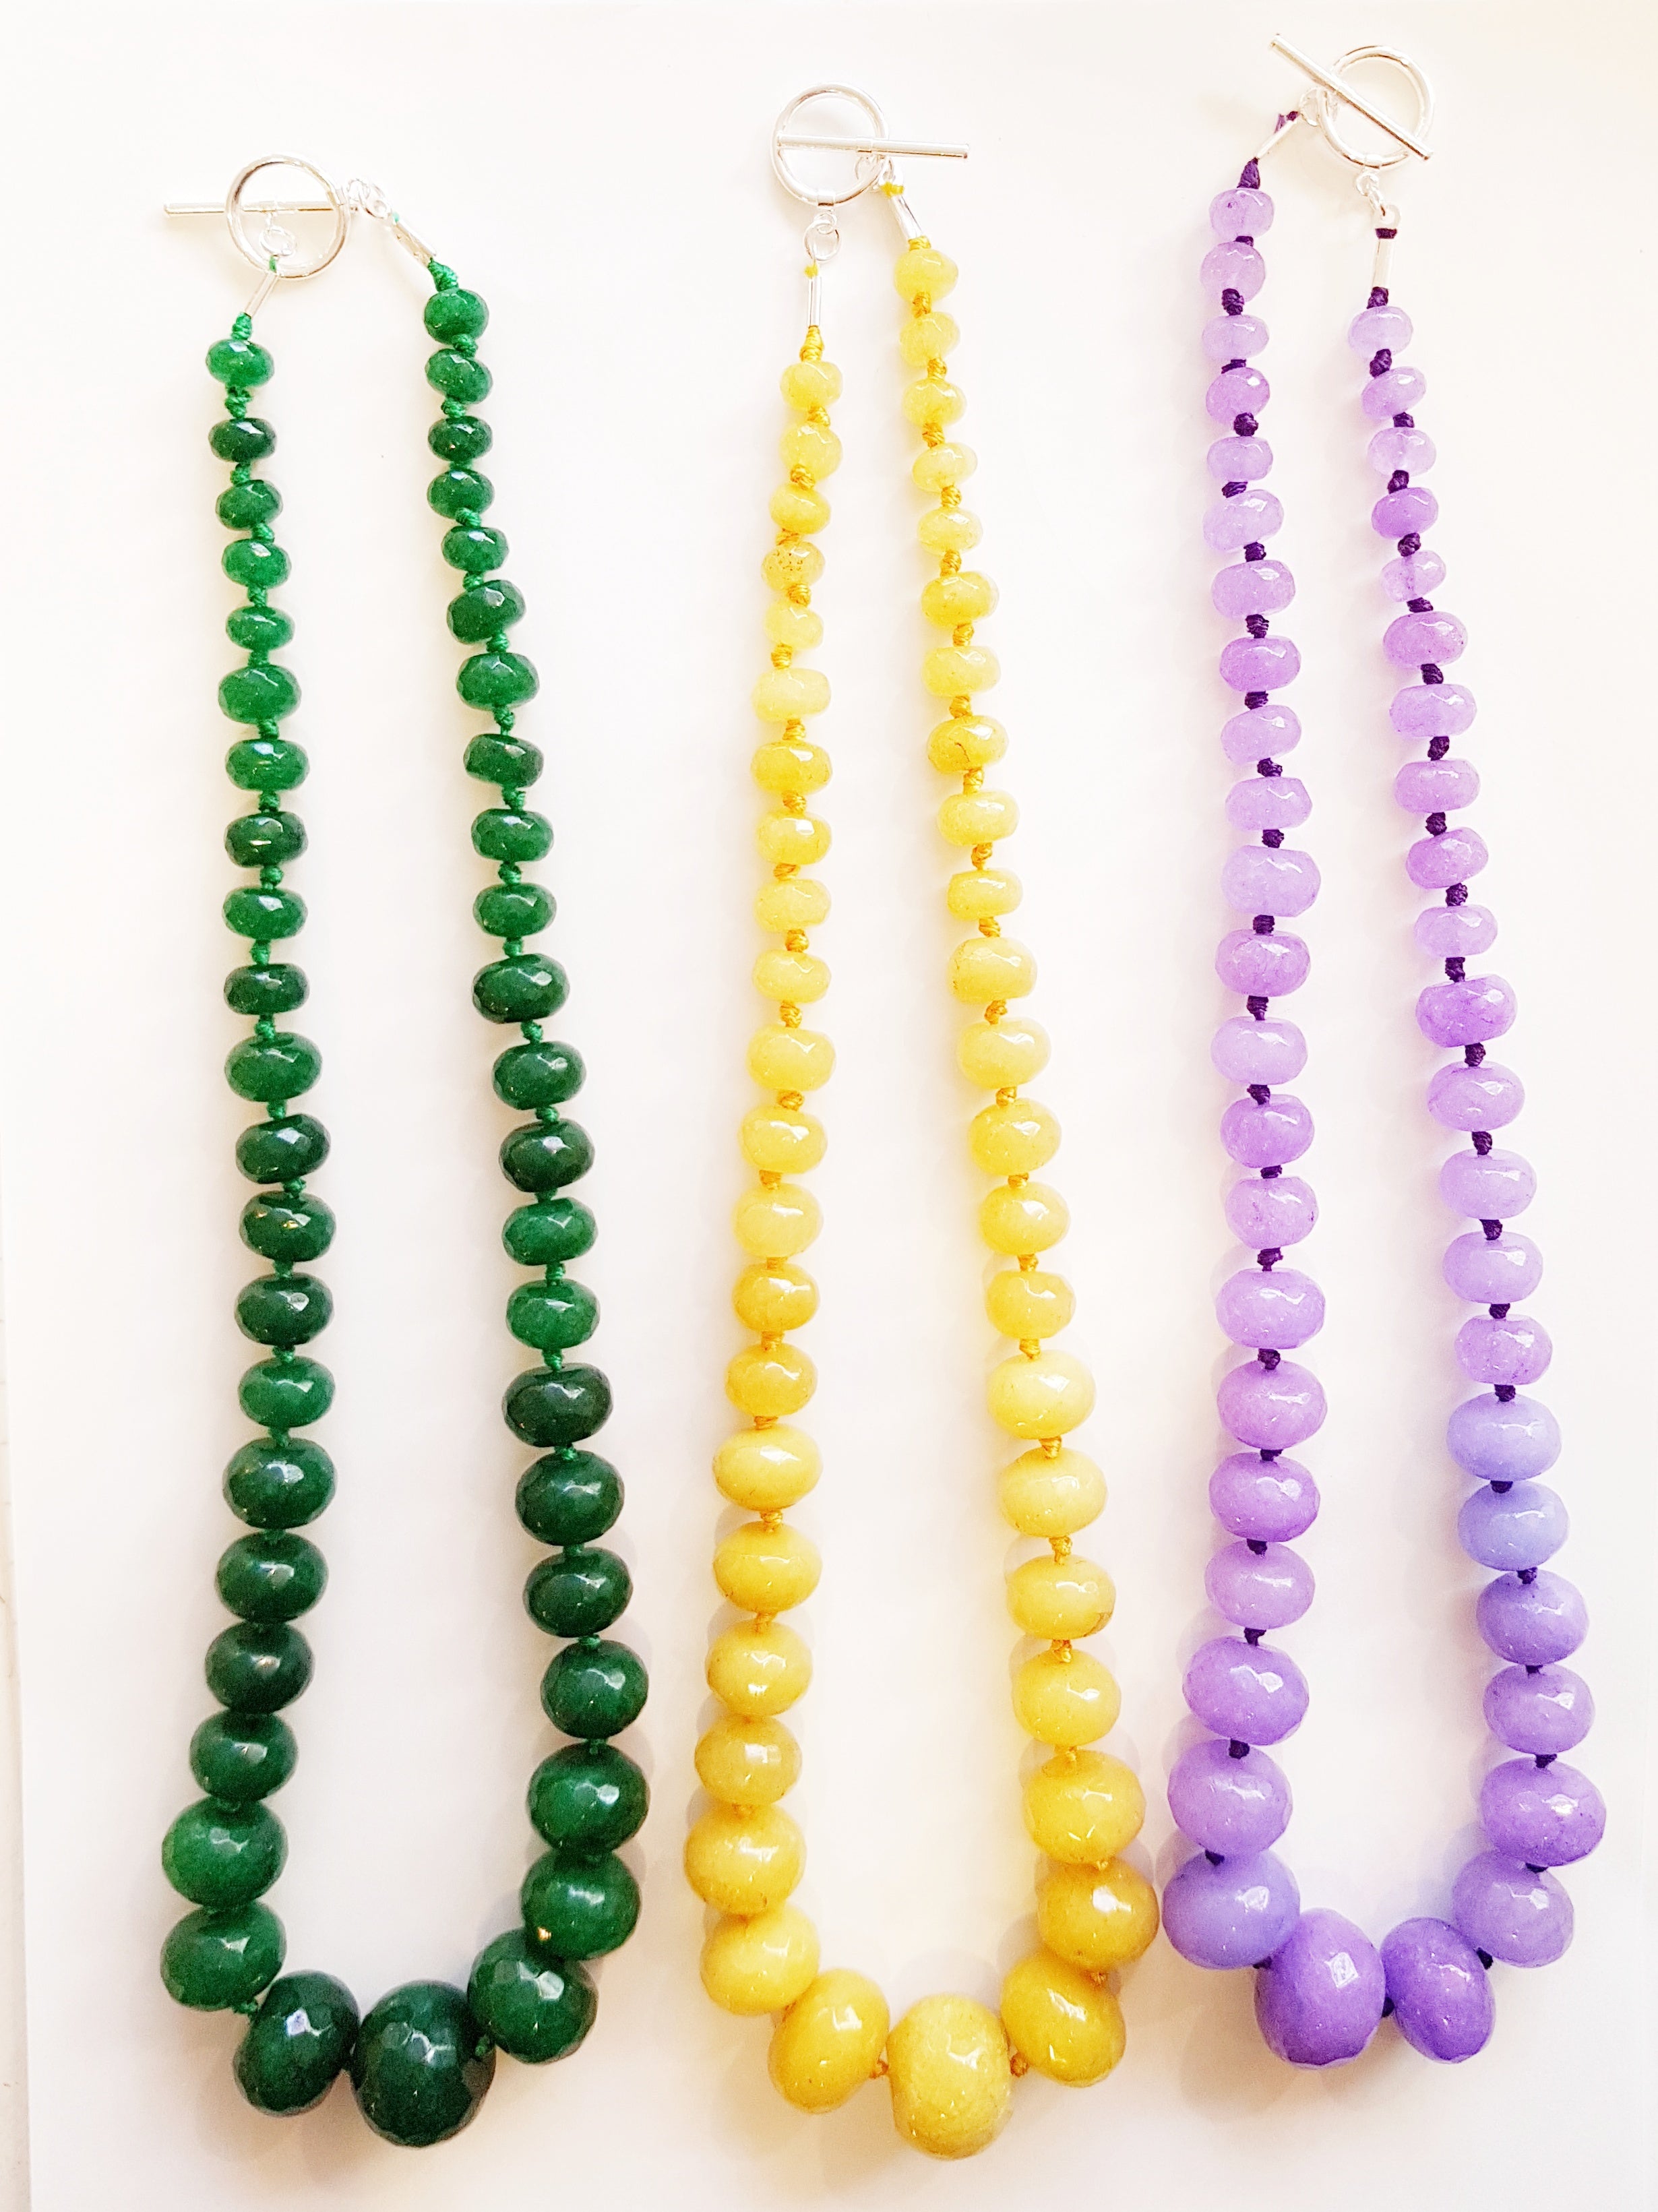 alex green beaded necklace - $68